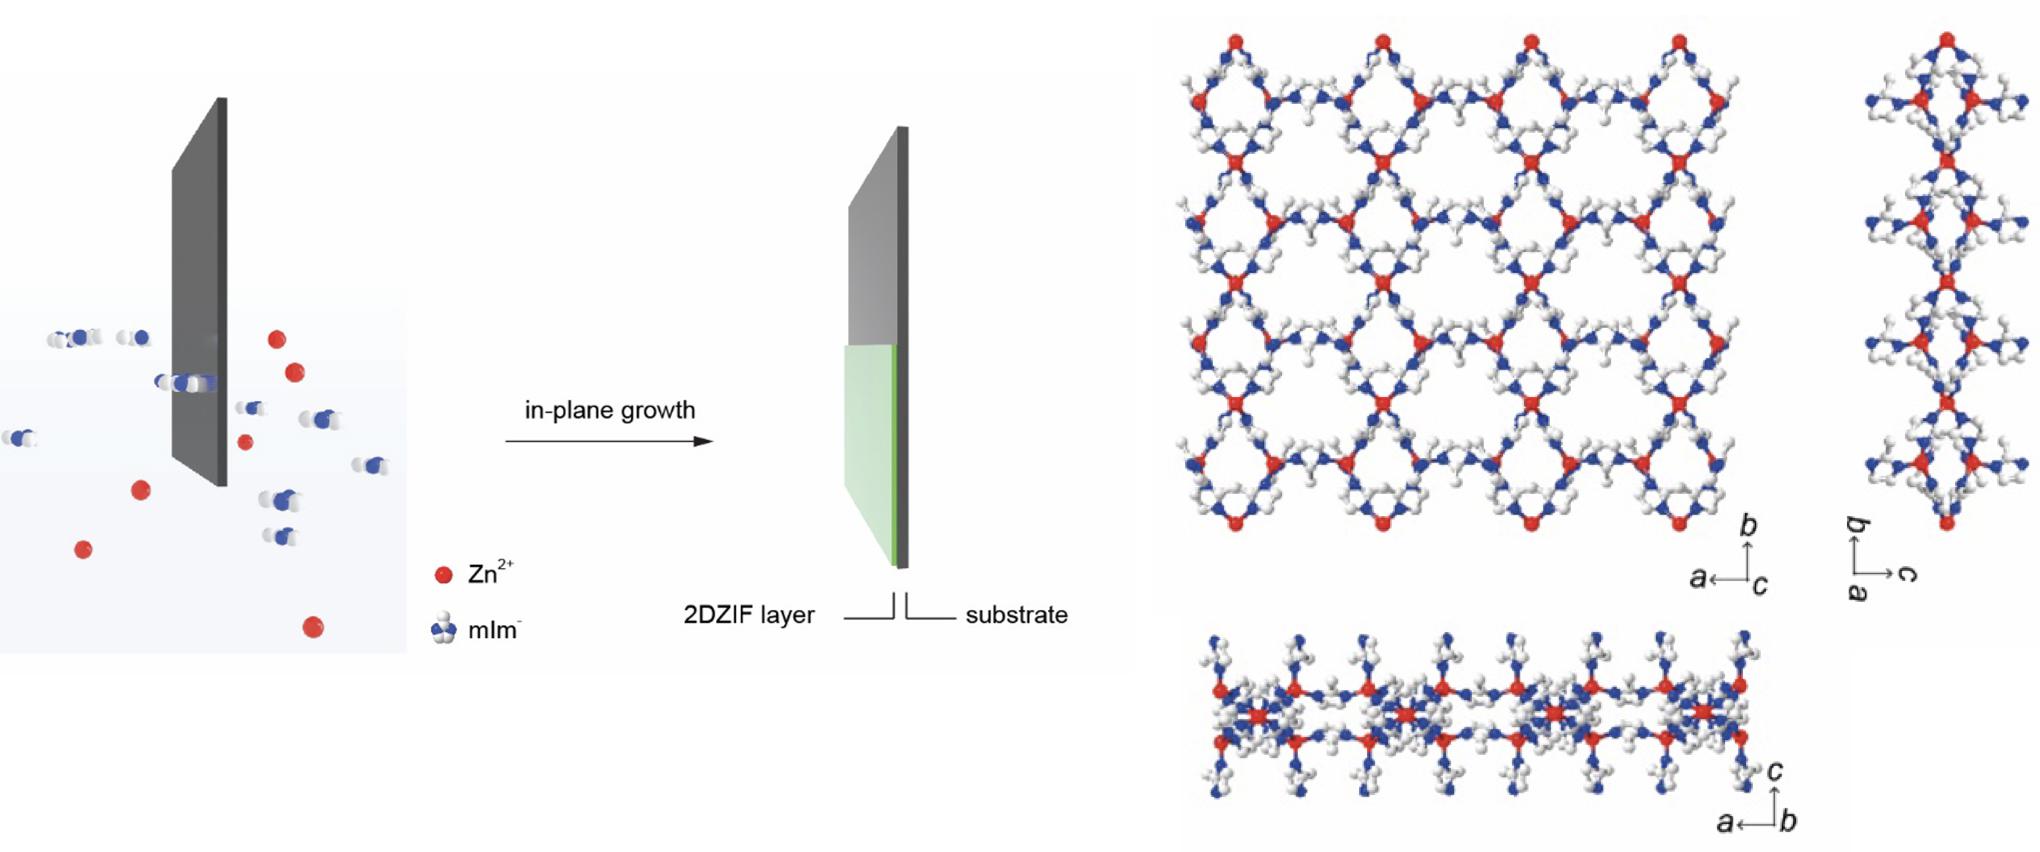 Schematic showing straightforward crystallization of 2d ZIF film by dipping a substrate in ultradilute precursor solution at room temperature (left). Right: Crystal structure of 2d ZIF where white, blue, and red atoms represent carbon, nitrogen, and zinc atoms. Credit: Qi Liu, EPFL.